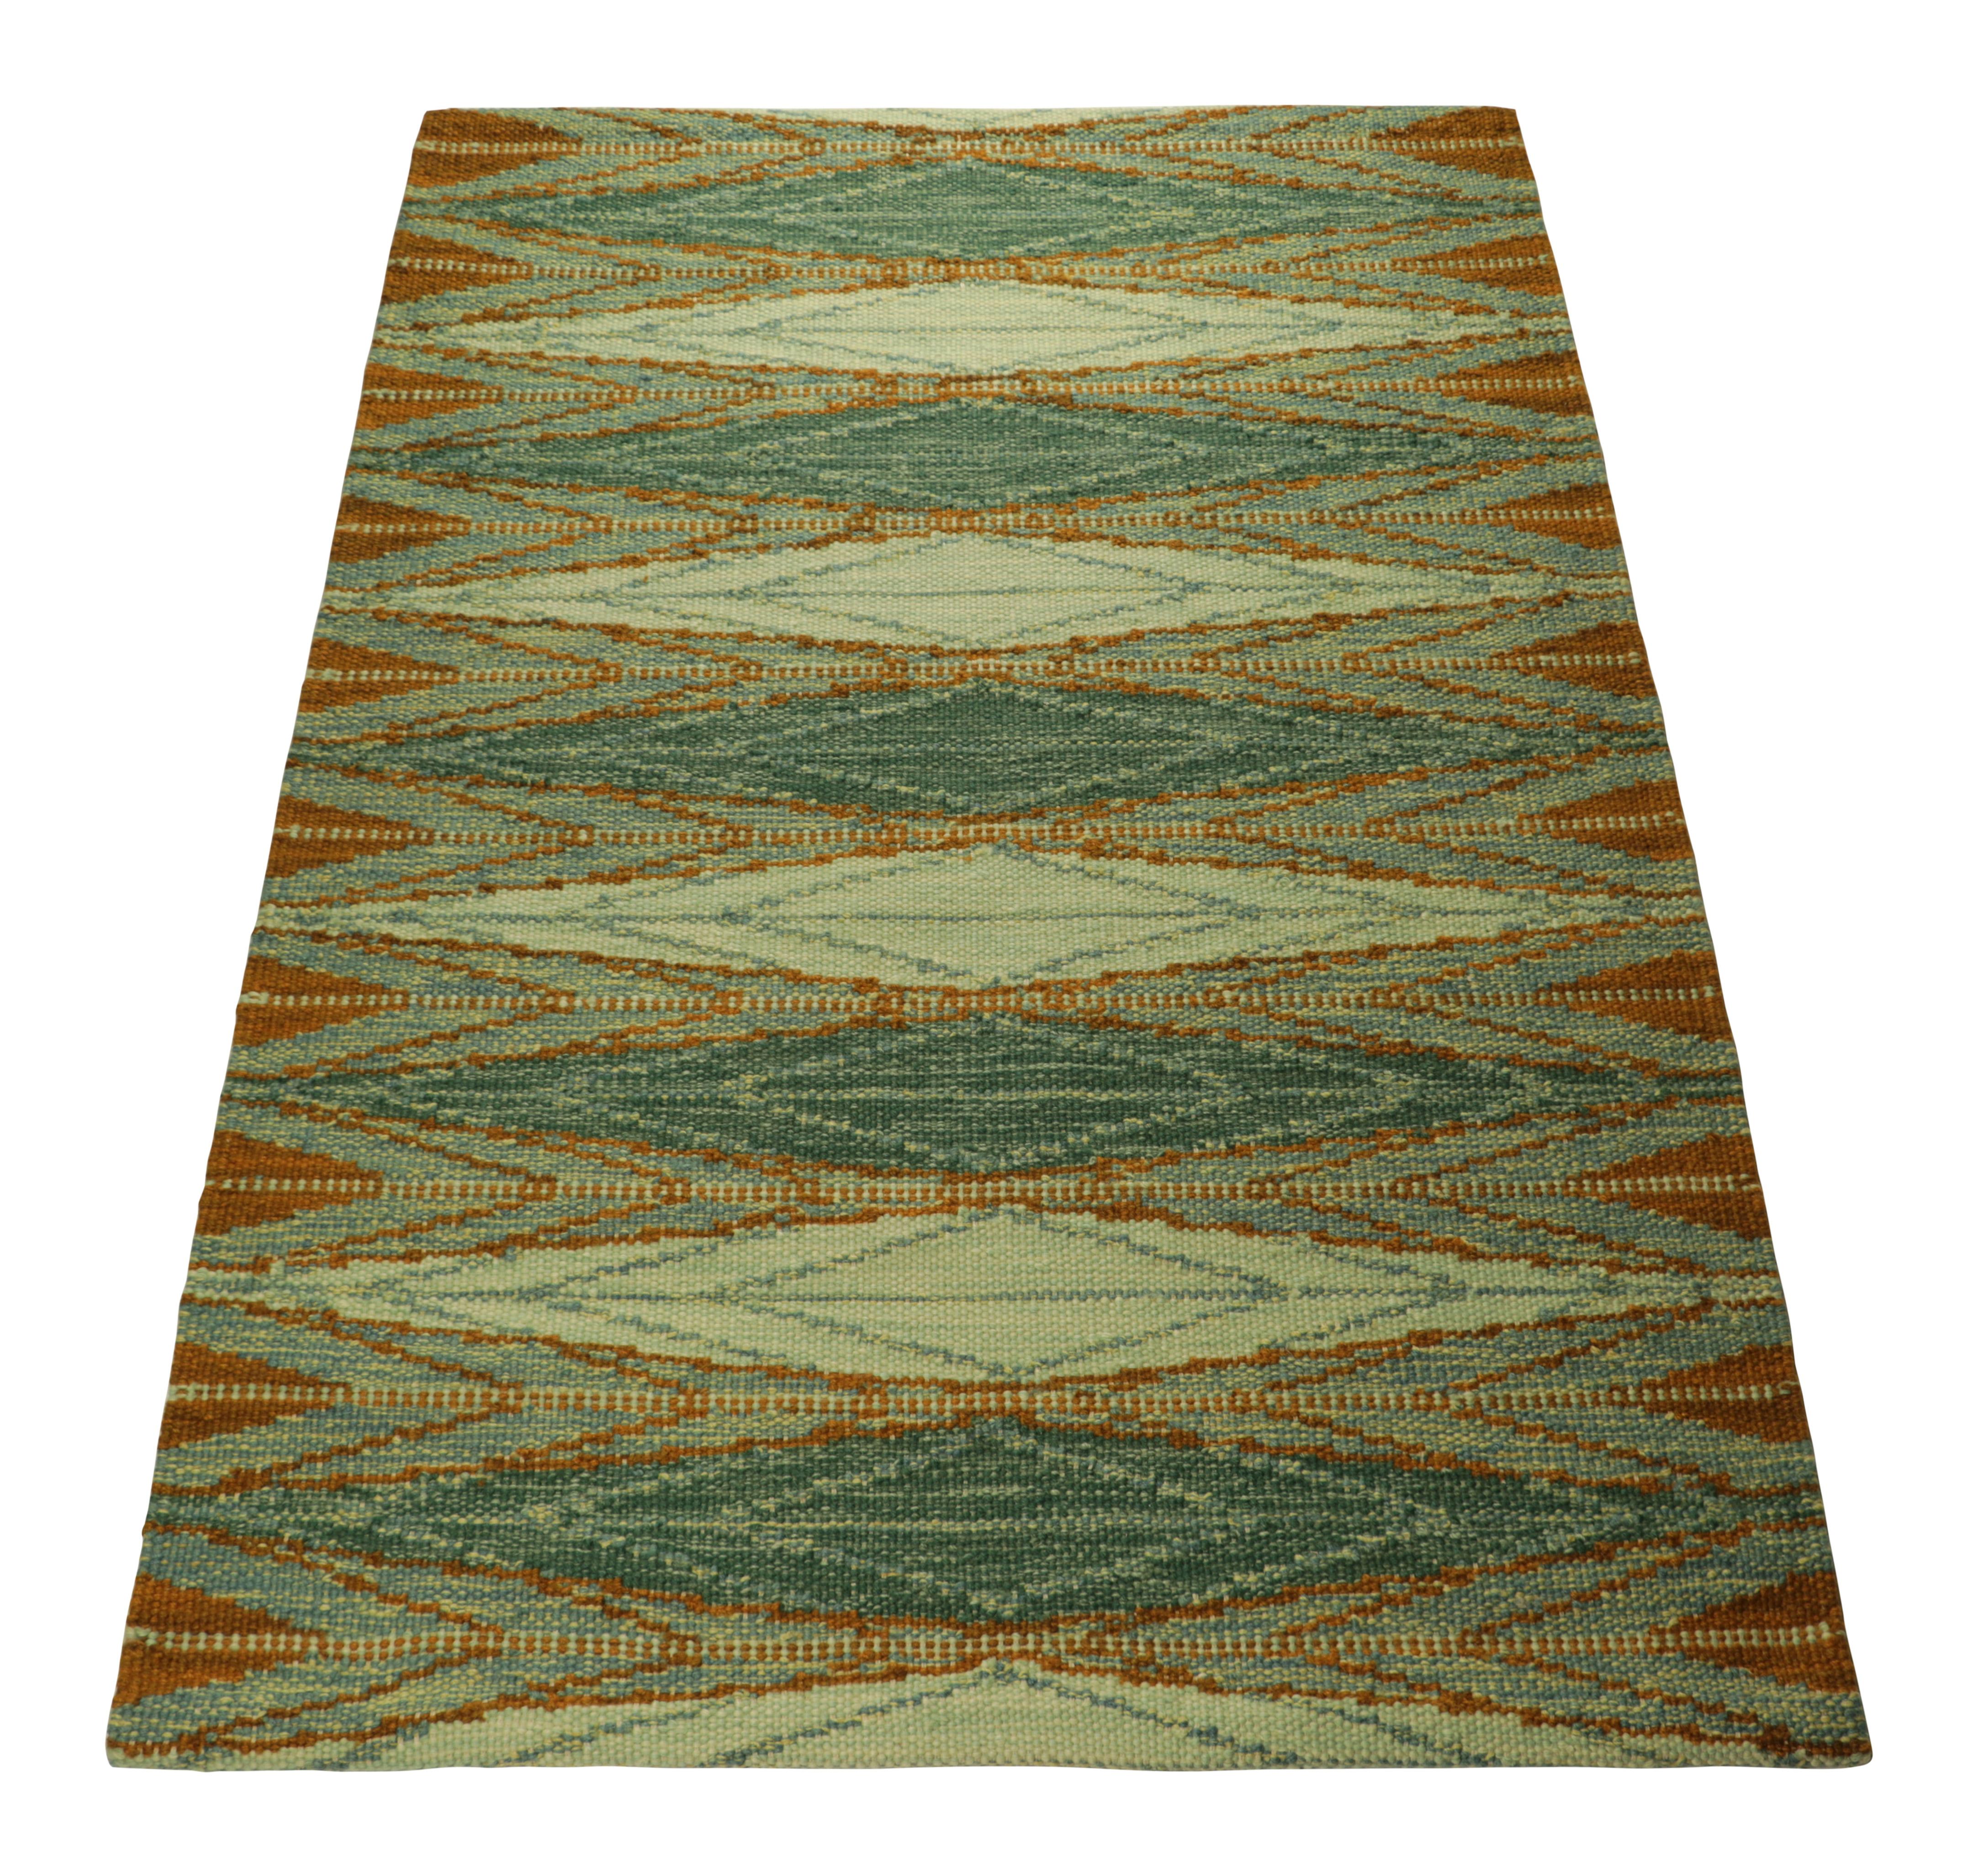 Hand-Woven Rug & Kilim’s Scandinavian Style Rug in Green, with Orange Geometric Patterns For Sale